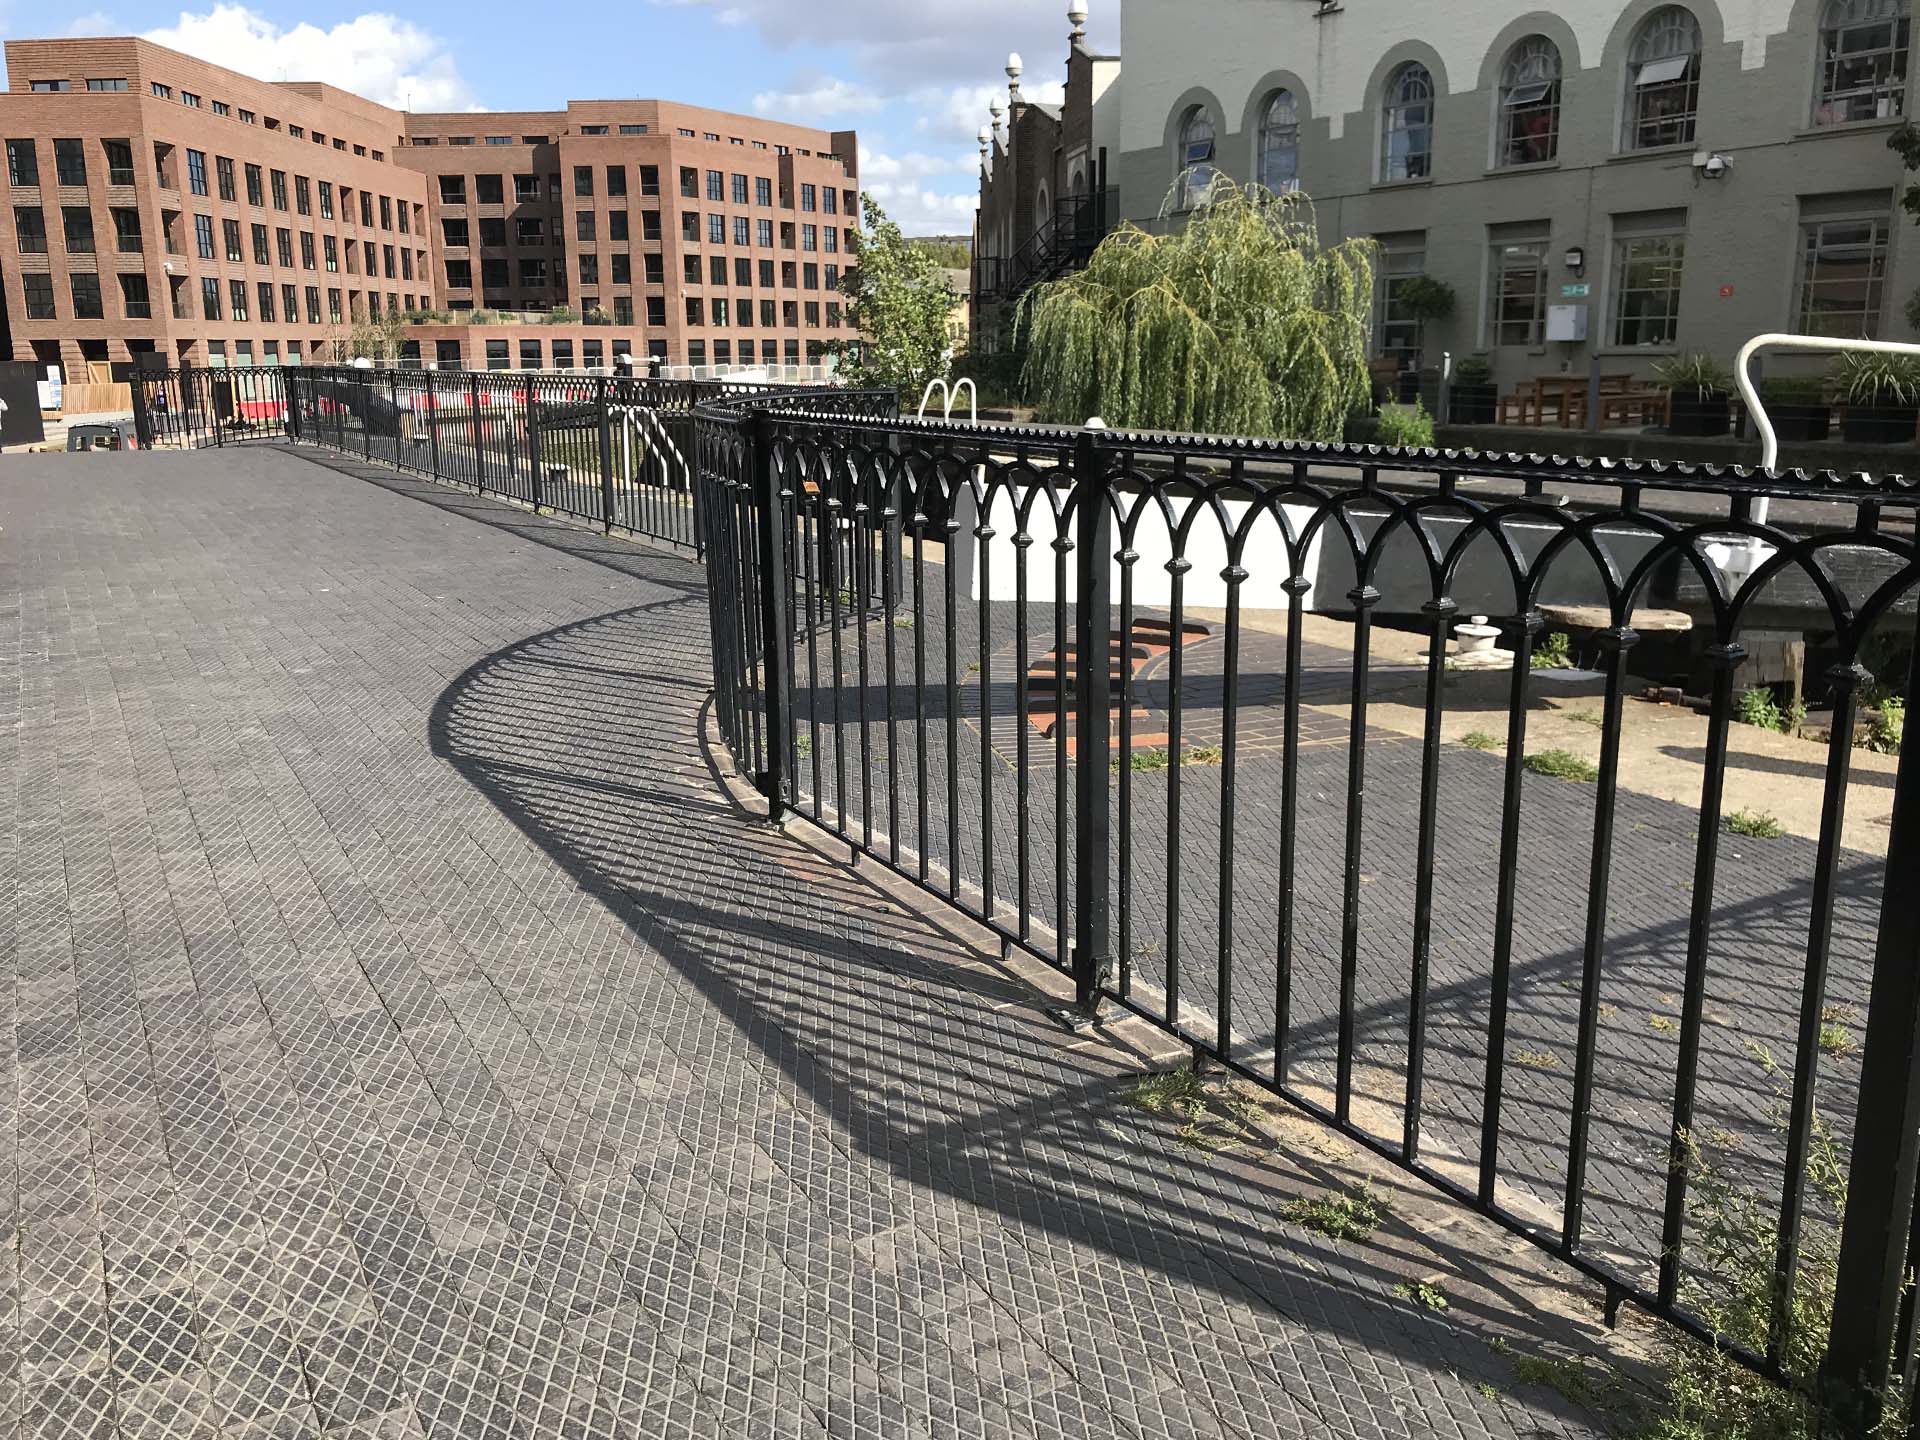 diamond chequer pavers at the newly renovated Hawley Wharf in London